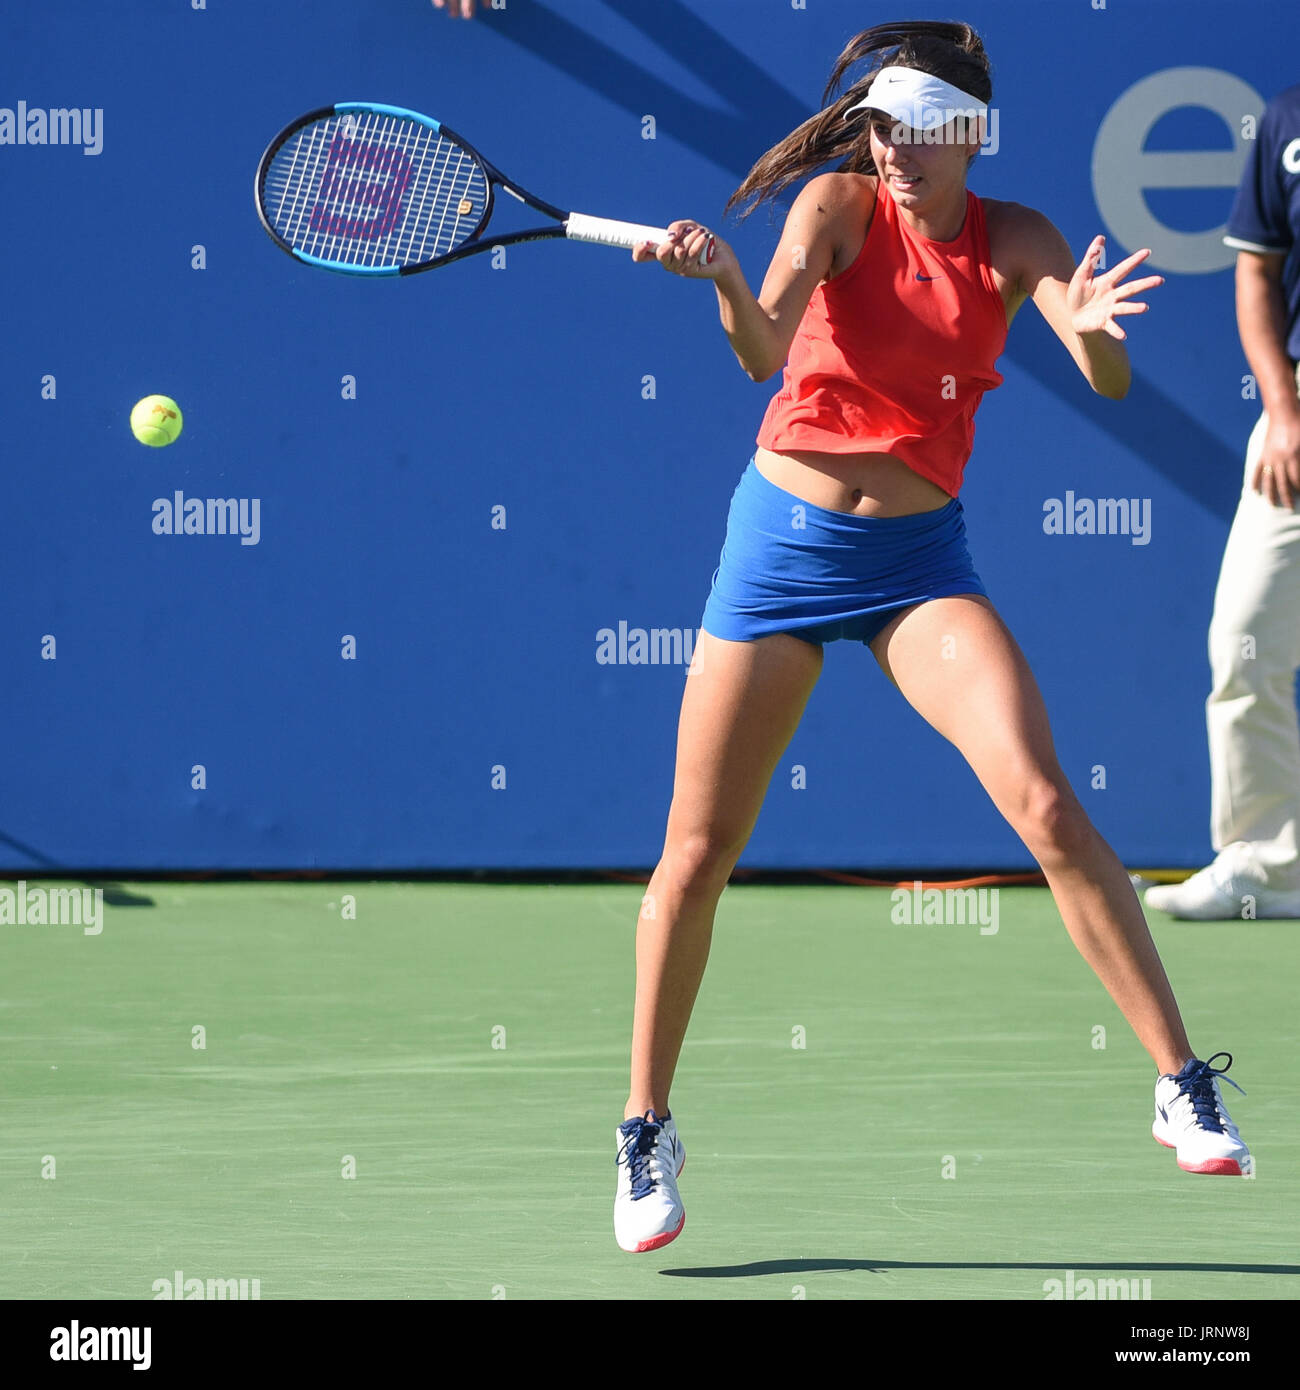 Washington, D.C, USA. 5th Aug, 2017. OCEANE DODIN hits a forehand during her semifinal match at the Citi Open at the Rock Creek Park Tennis Center in Washington, DC Credit: Kyle Gustafson/ZUMA Wire/Alamy Live News Stock Photo